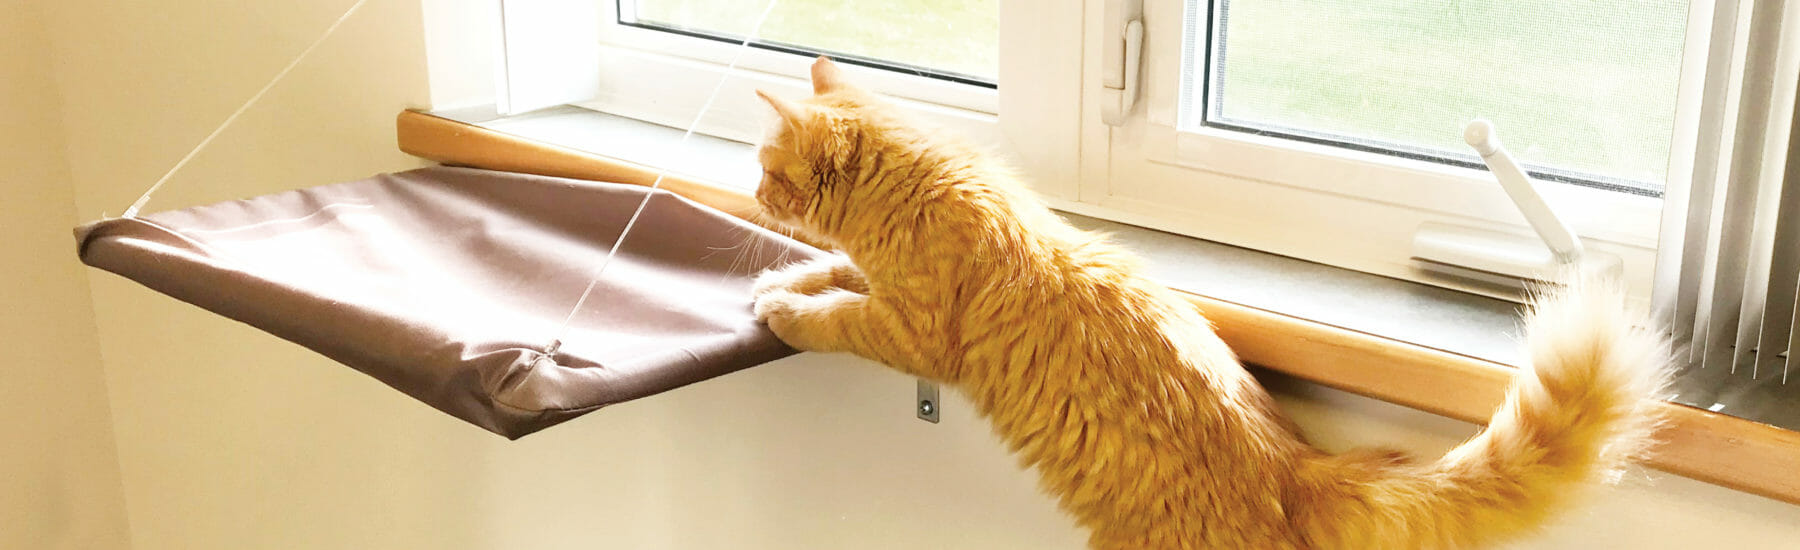 Orange cat jumping into hanging bed on window